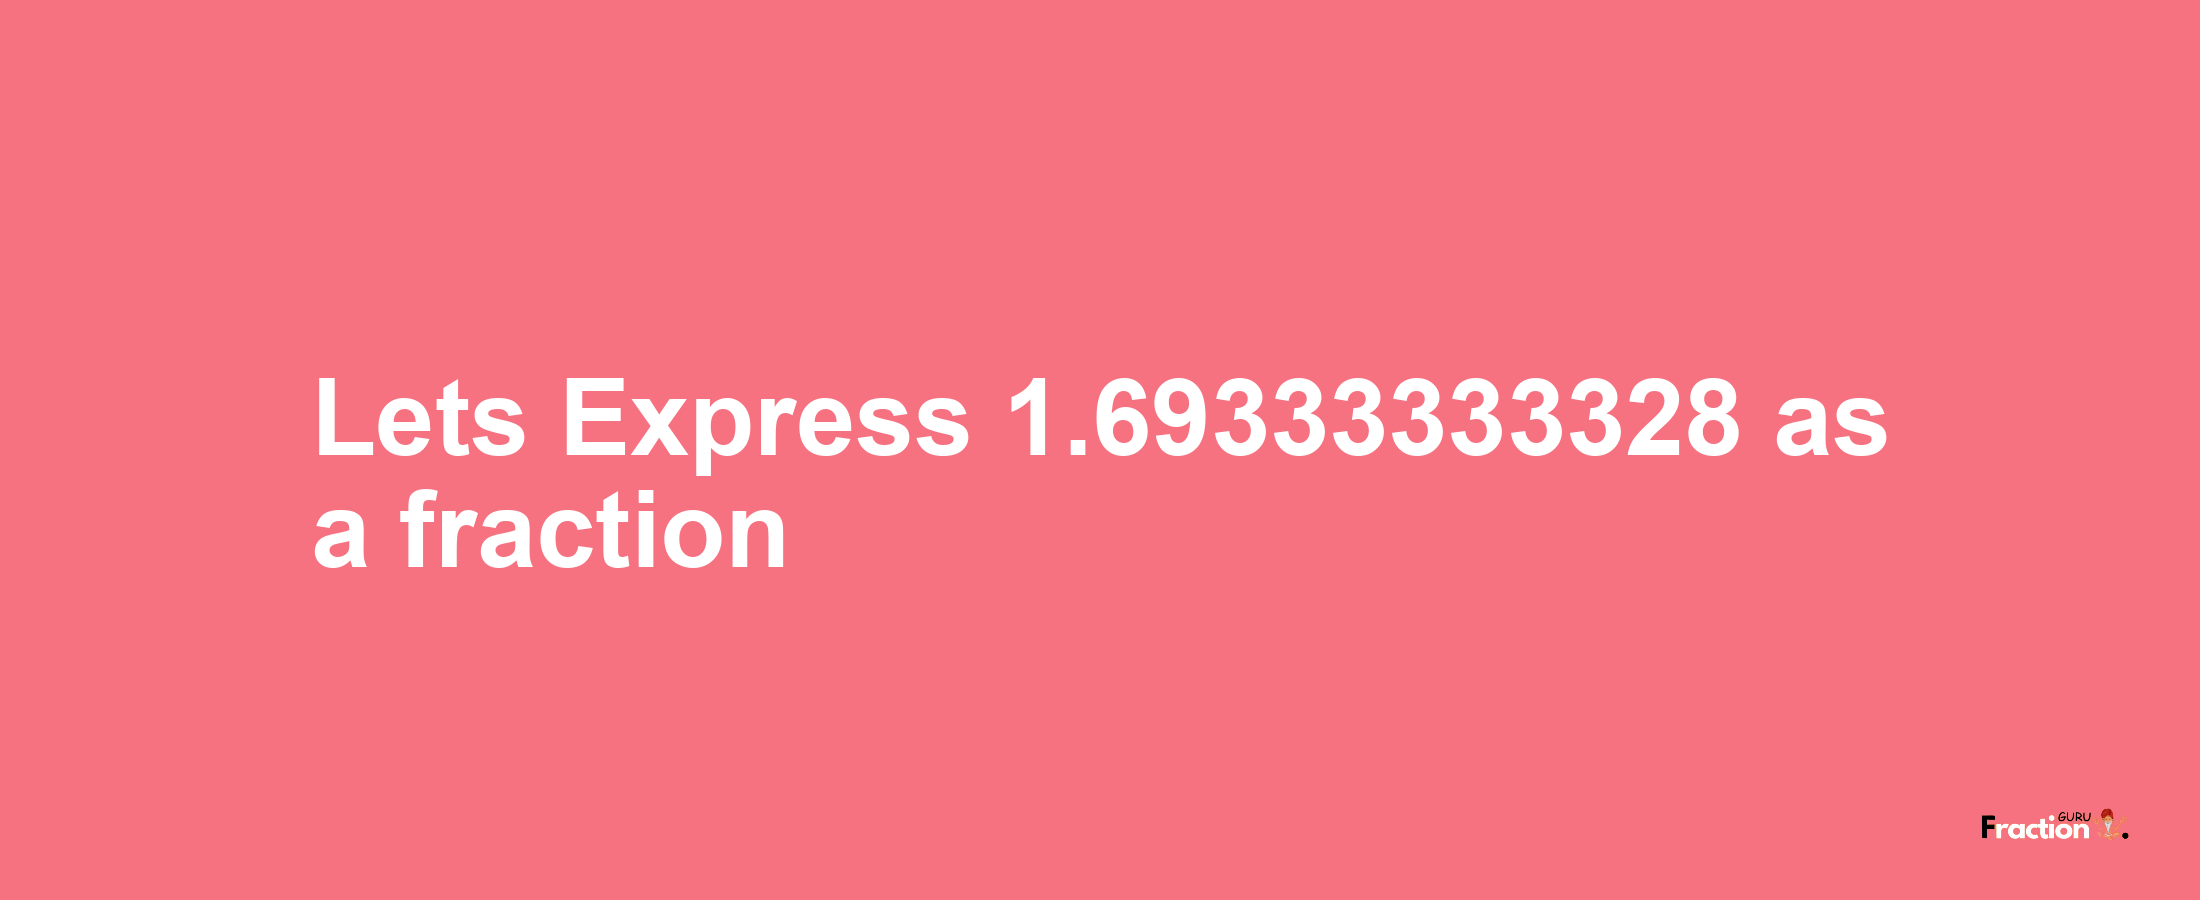 Lets Express 1.69333333328 as afraction